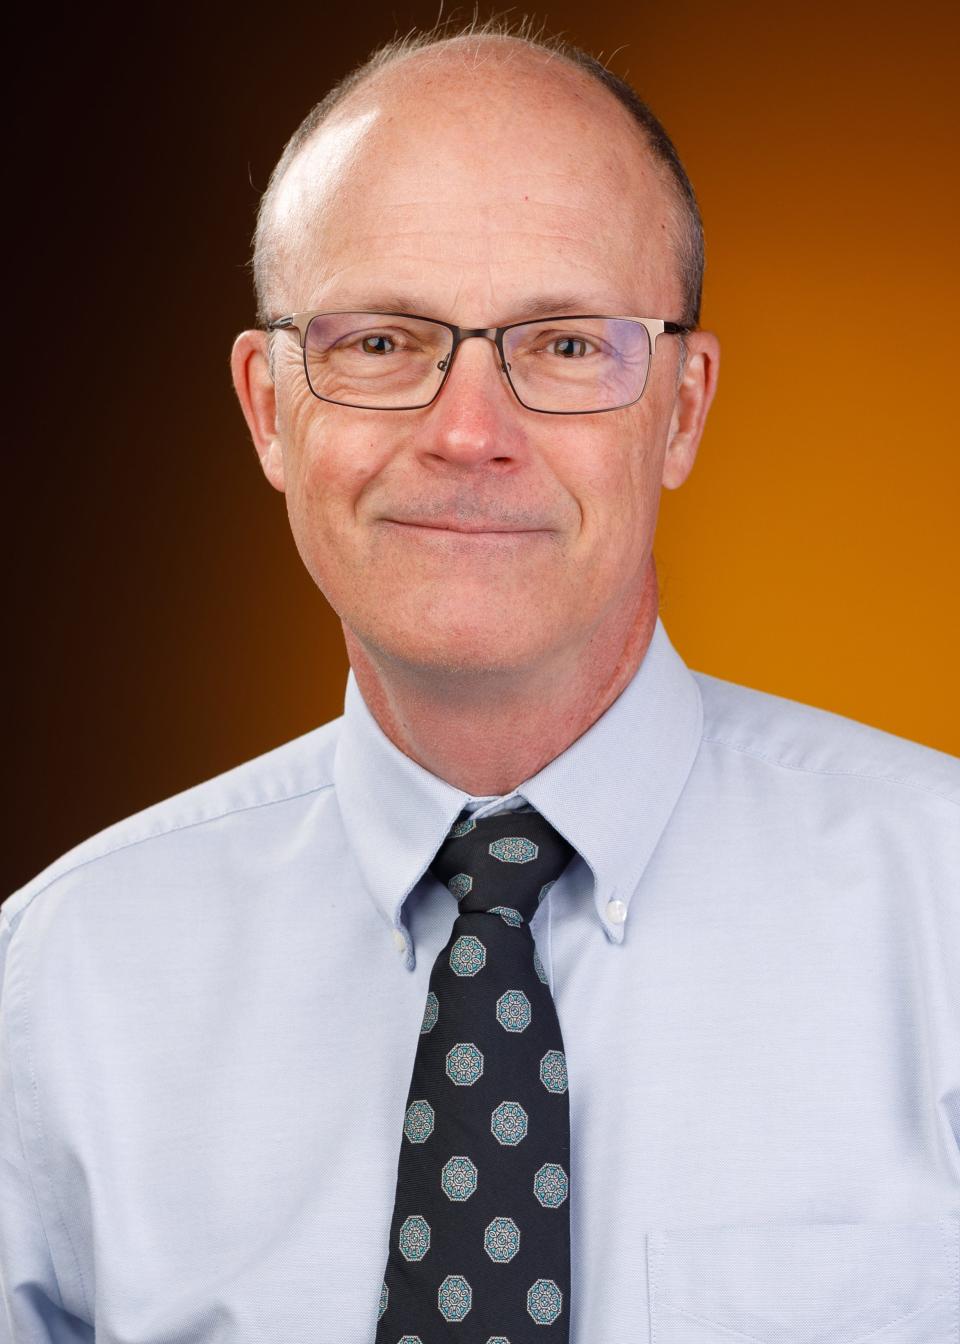 Chris Bowers is Interim Dean of the Getty College of Arts and Sciences and a Professor of Chemistry at Ohio Northern University.